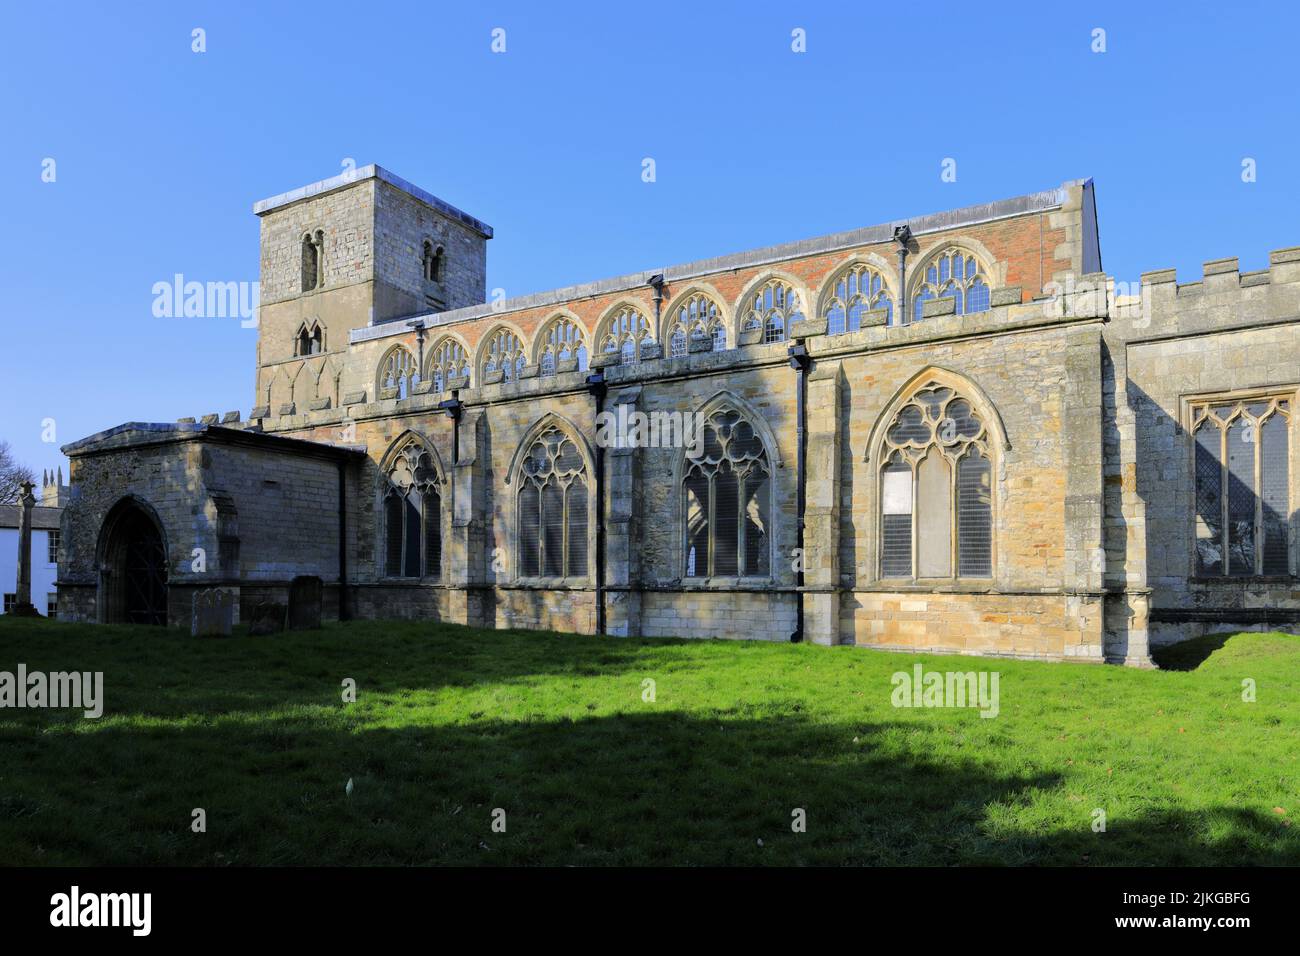 St Peters church, Barton-upon-Humber village, Lincolnshire County, England, UK Stock Photo